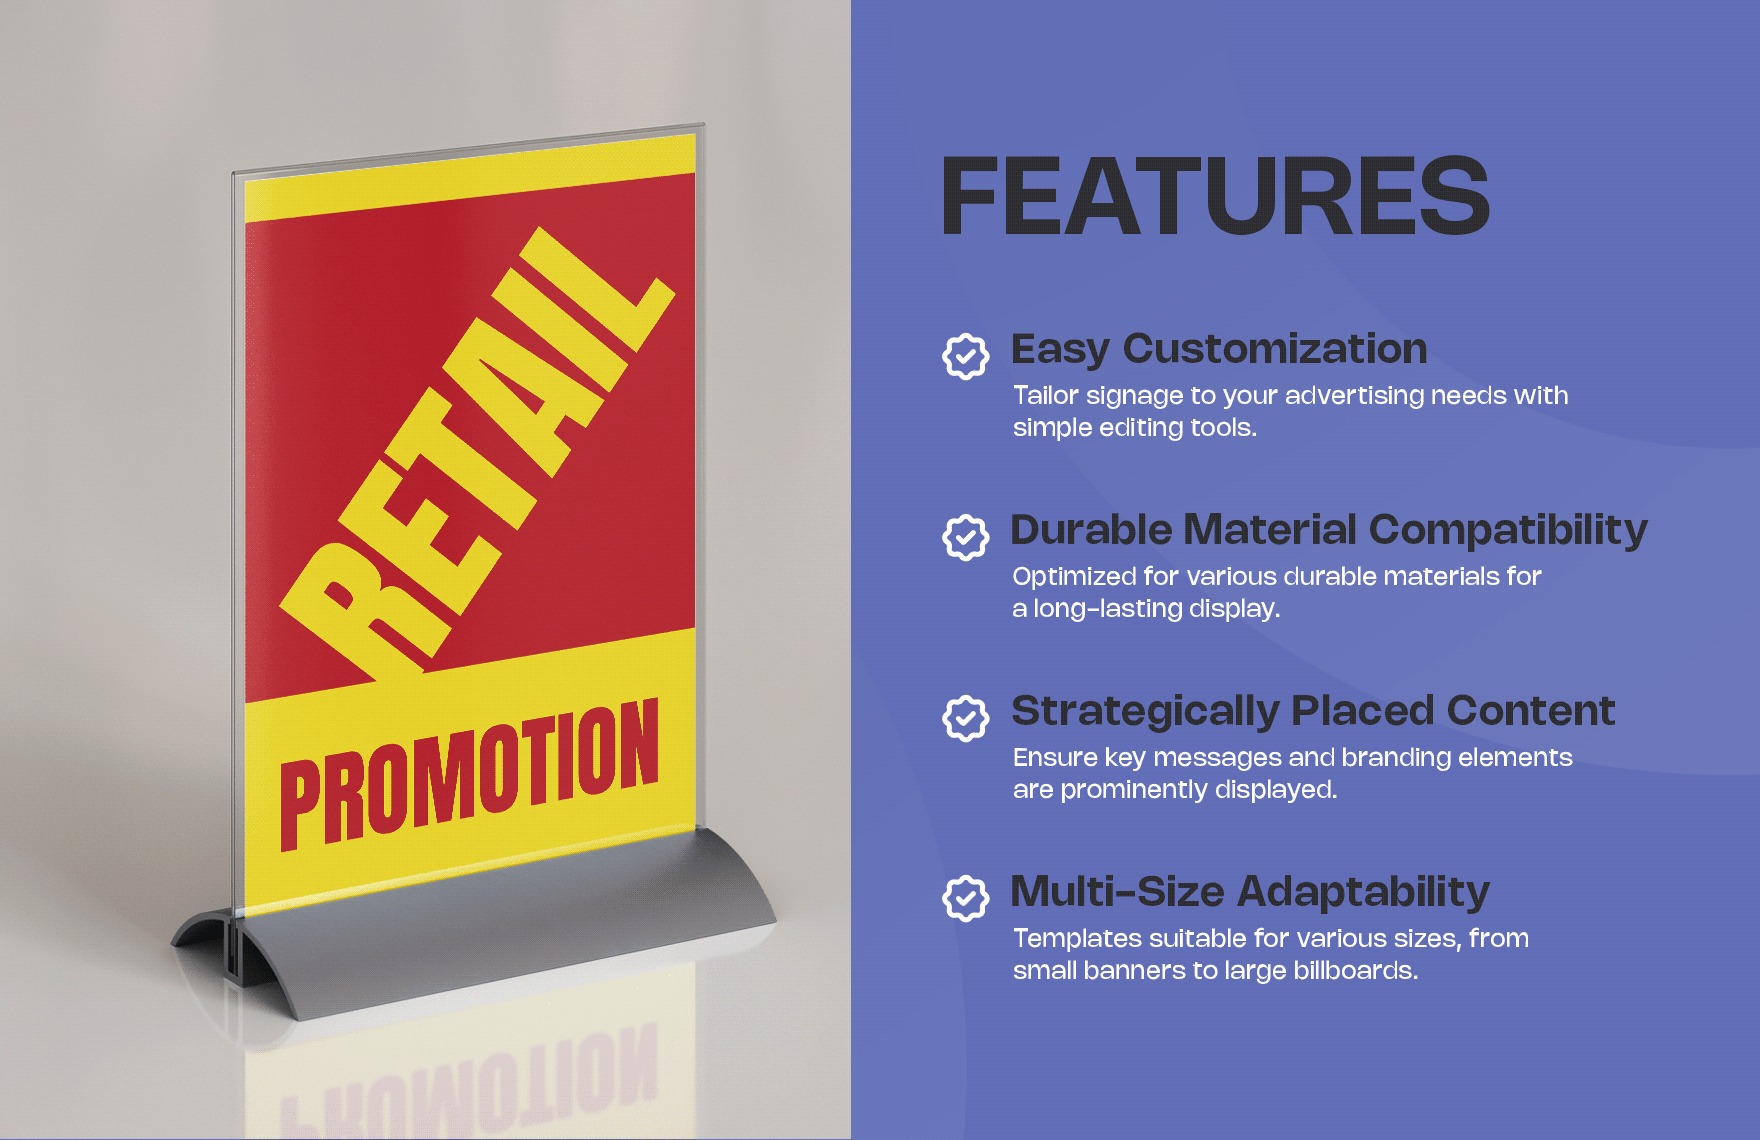 Retail Promotion Signage Template